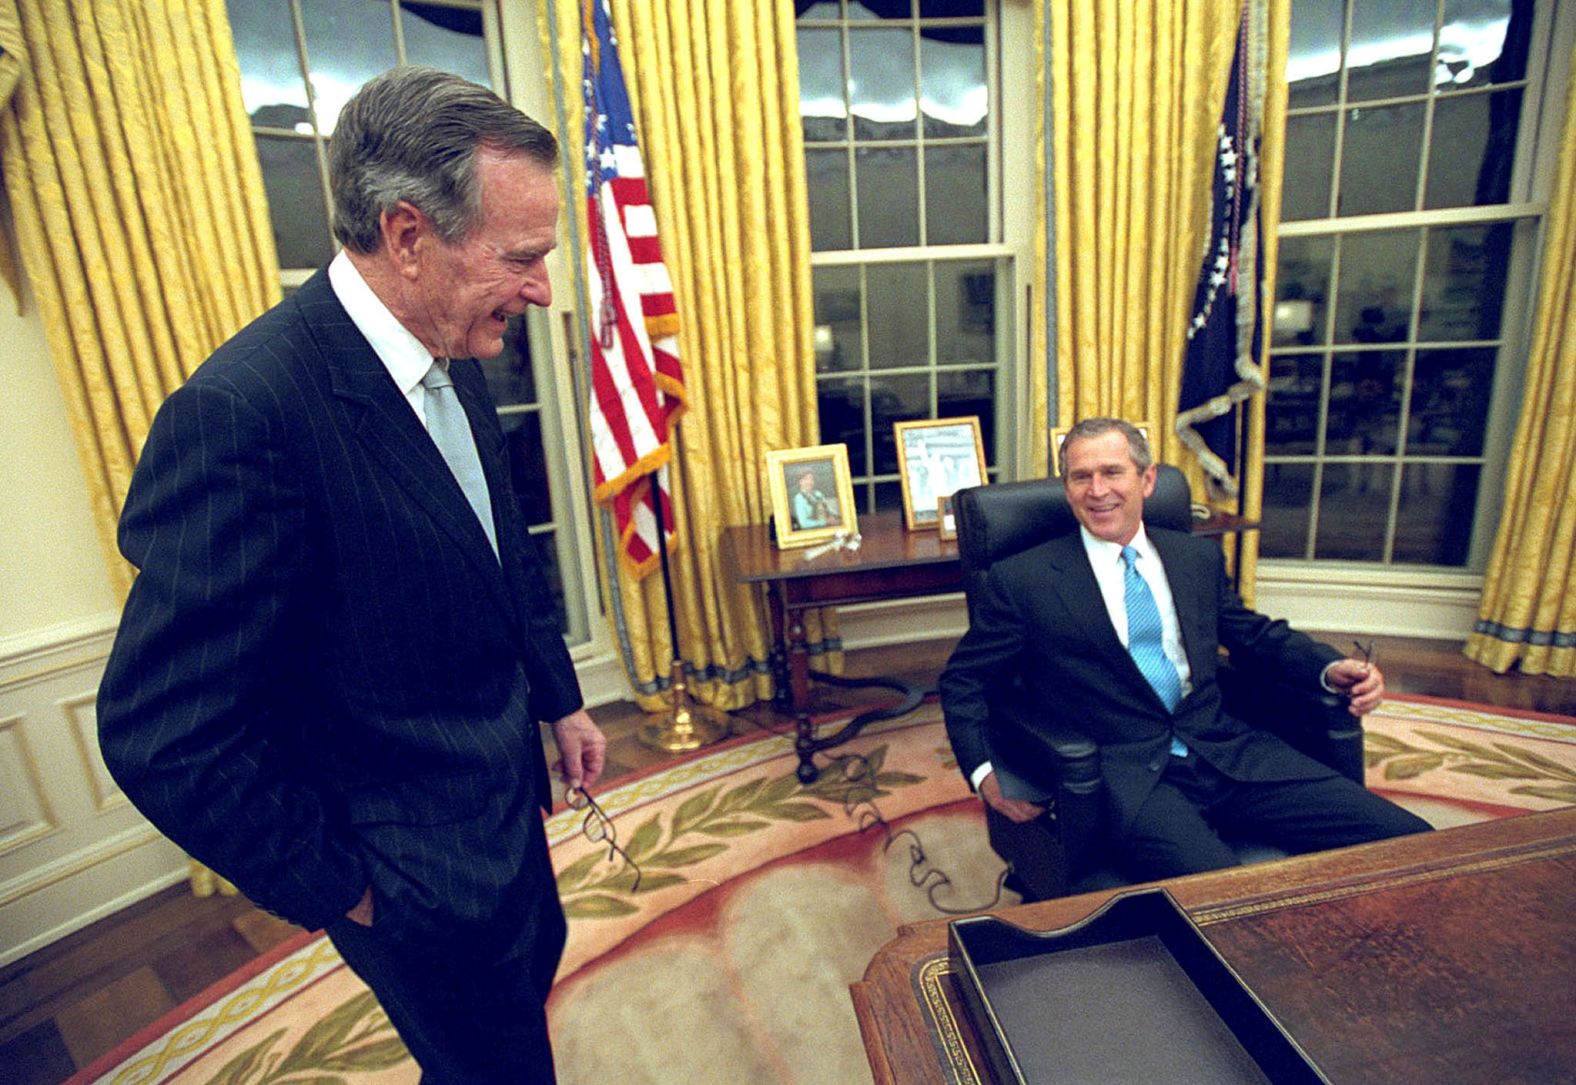 With his father by his side, President George W. Bush sits at his desk in the Oval Office for the first time on Inauguration Day, January 20, 2001.